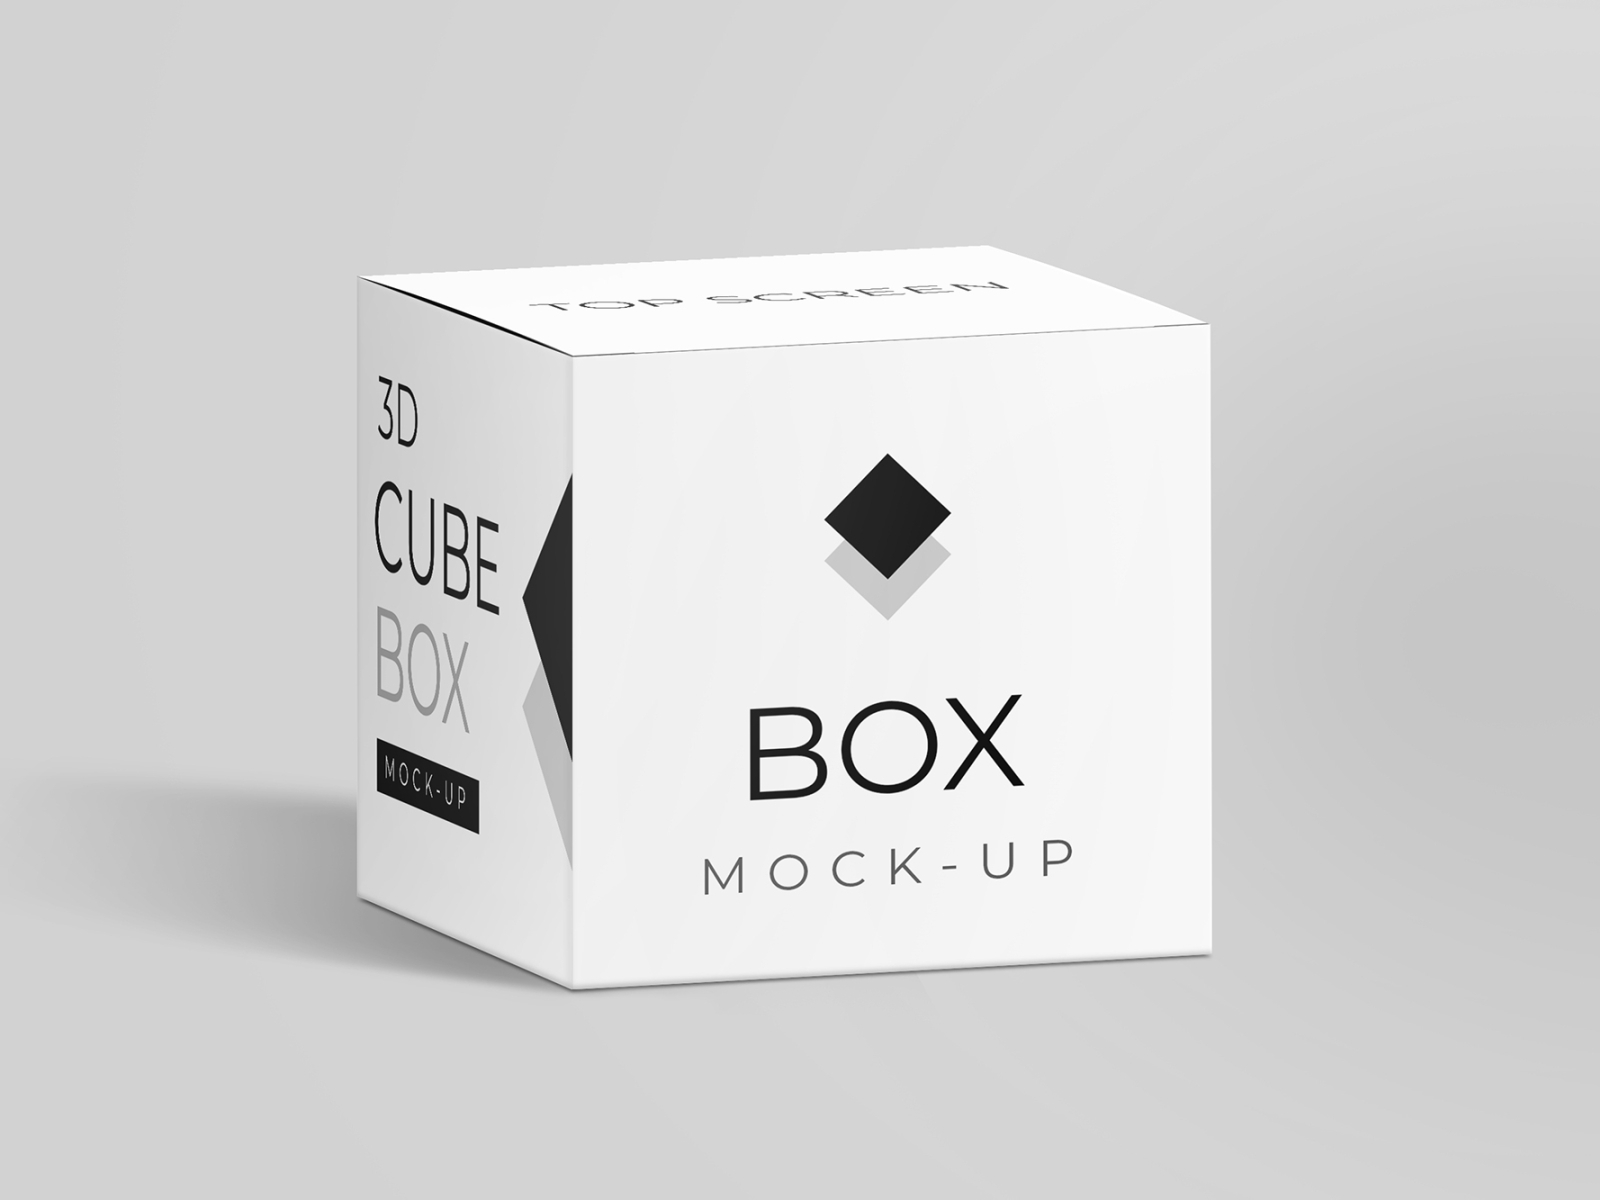 Download Cube Box Mockup For Packaging By Graphic Arena On Dribbble